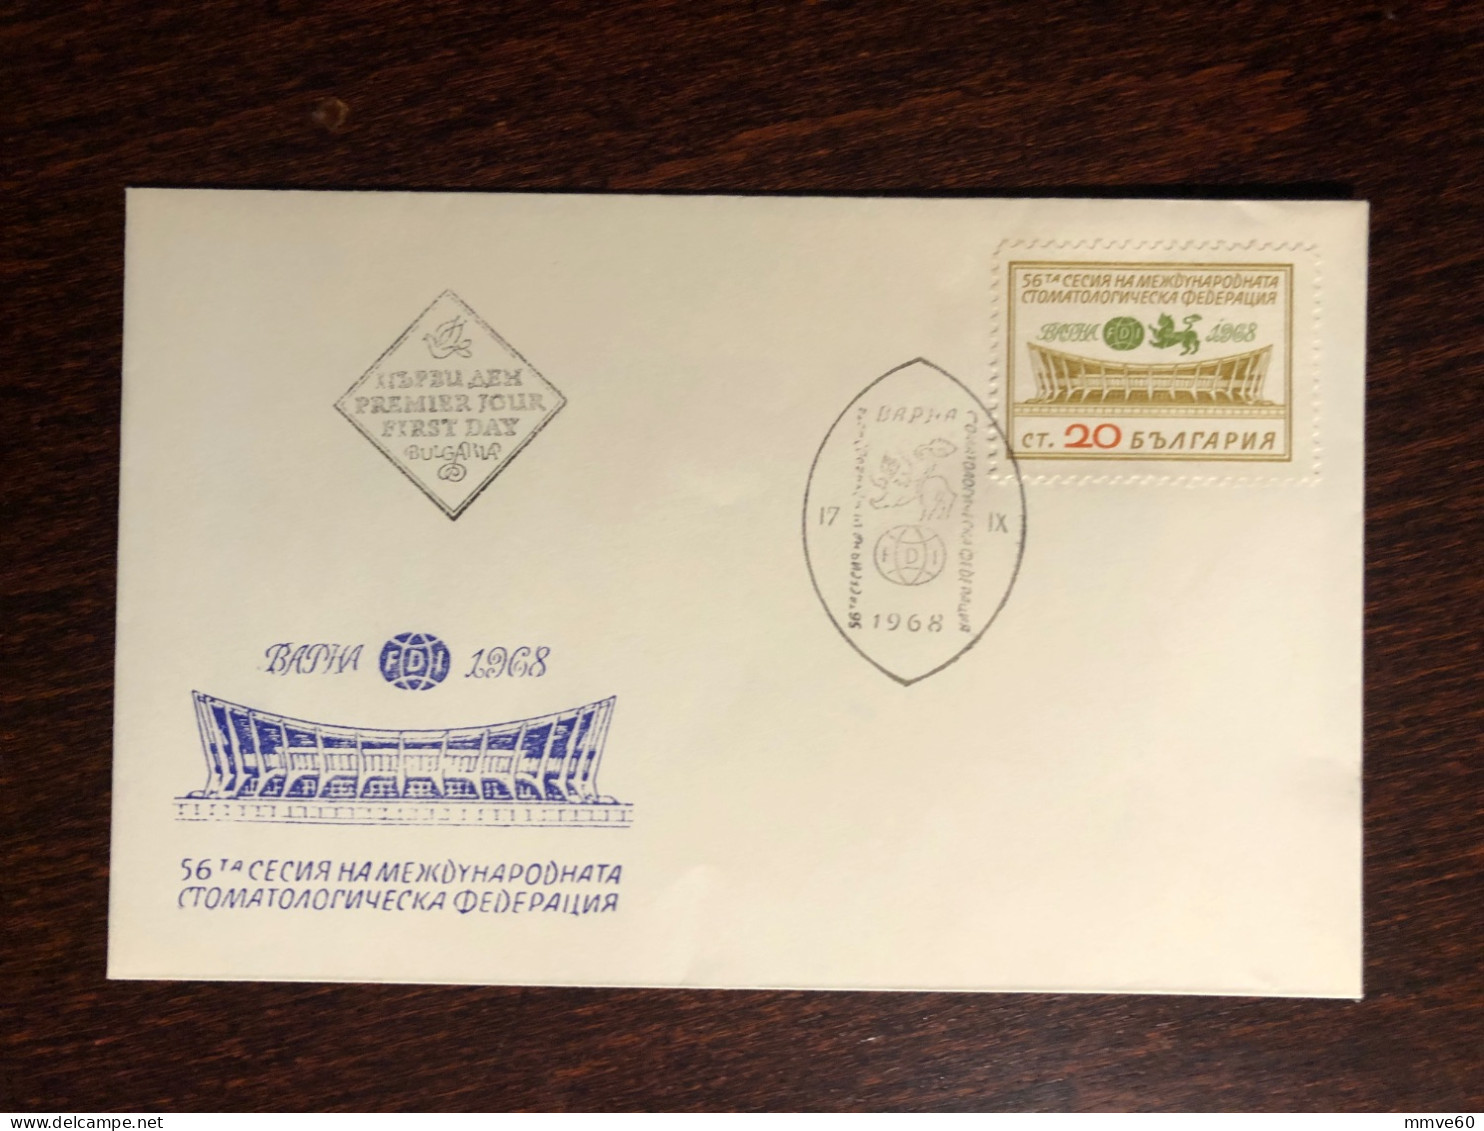 BULGARIA FDC COVER 1968 YEAR DENTAL DENTISTRY HEALTH MEDICINE STAMP - Covers & Documents